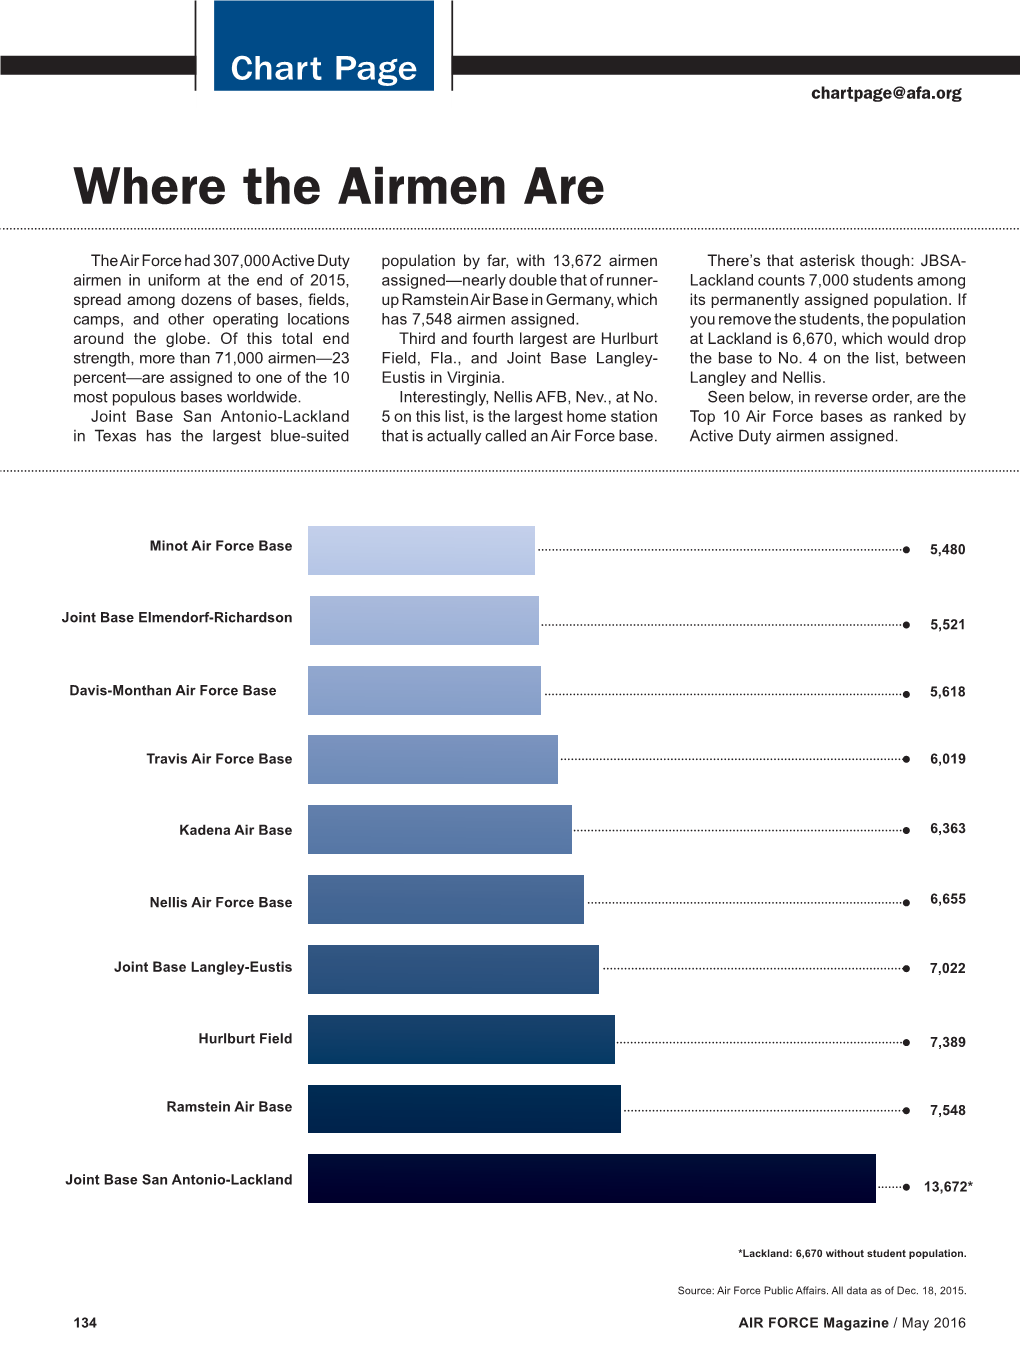 Where the Airmen Are